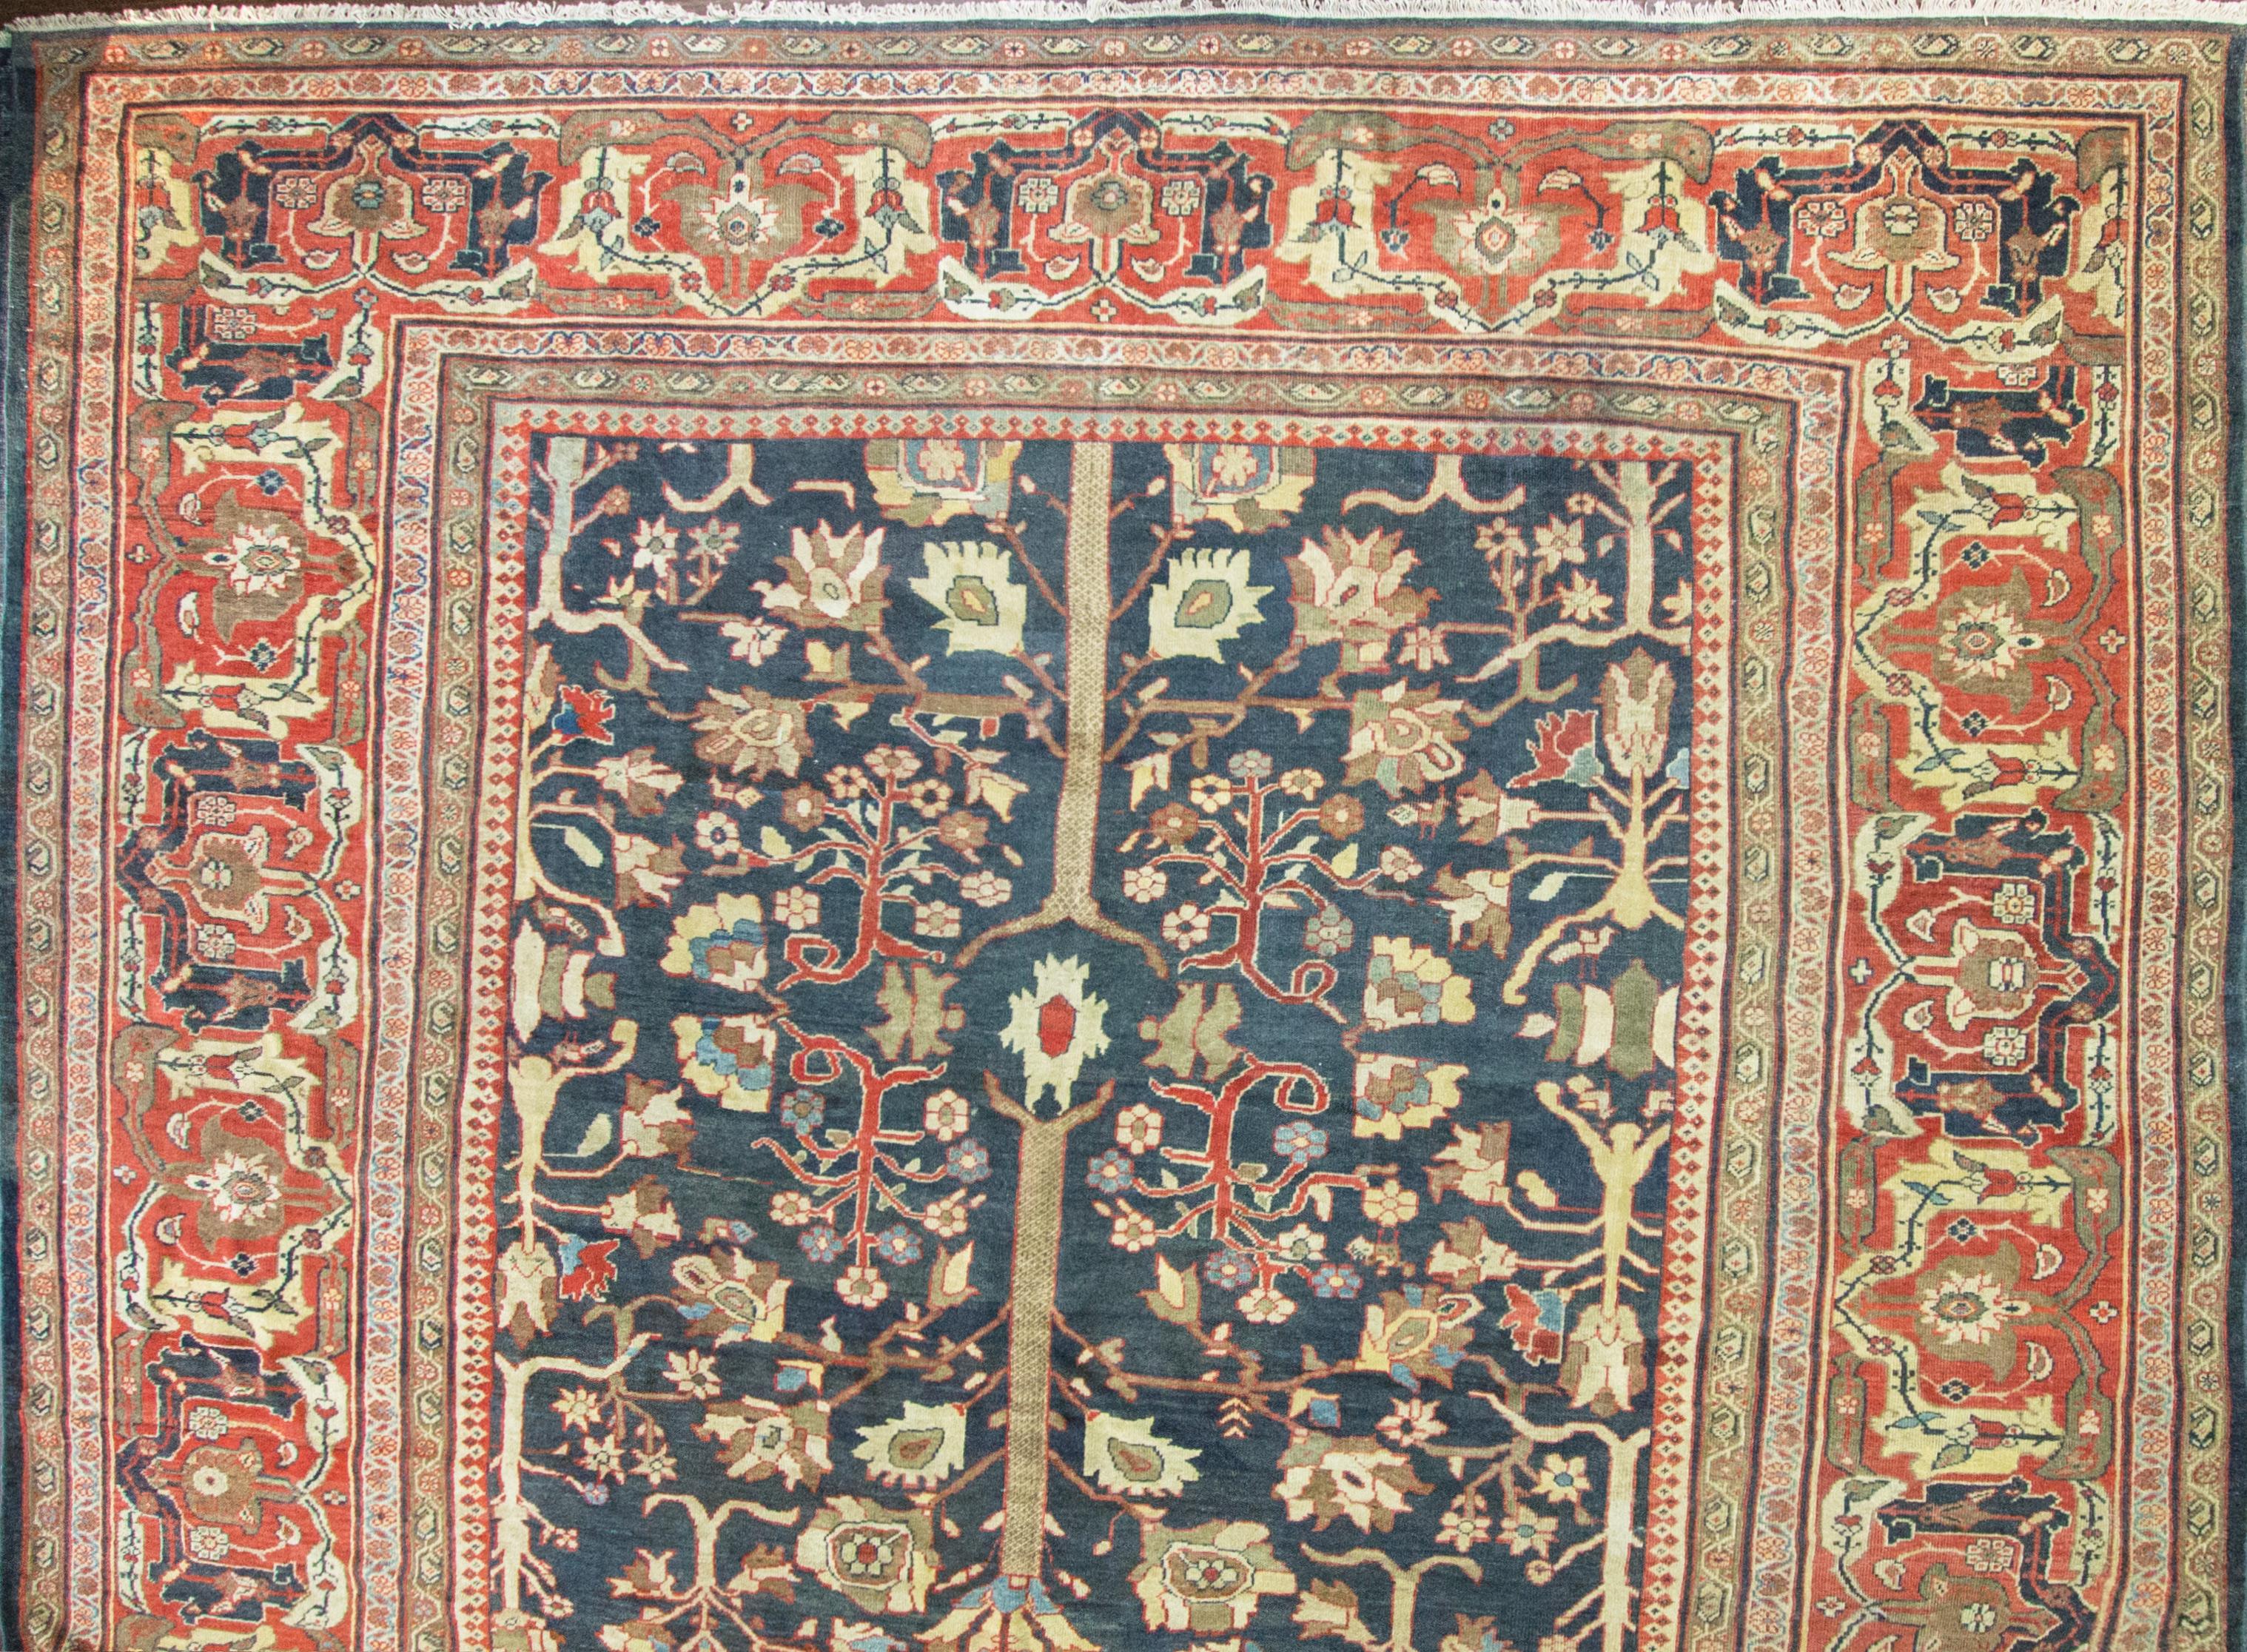 Antique Sultanabad rugs The city of Sultanabad (which is now known as Arak) was founded, in the early 1800s, as a center for commercial rug production in Iran. During the late 19th century, the firm of Hotz and Son and Ziegler and Co. established a